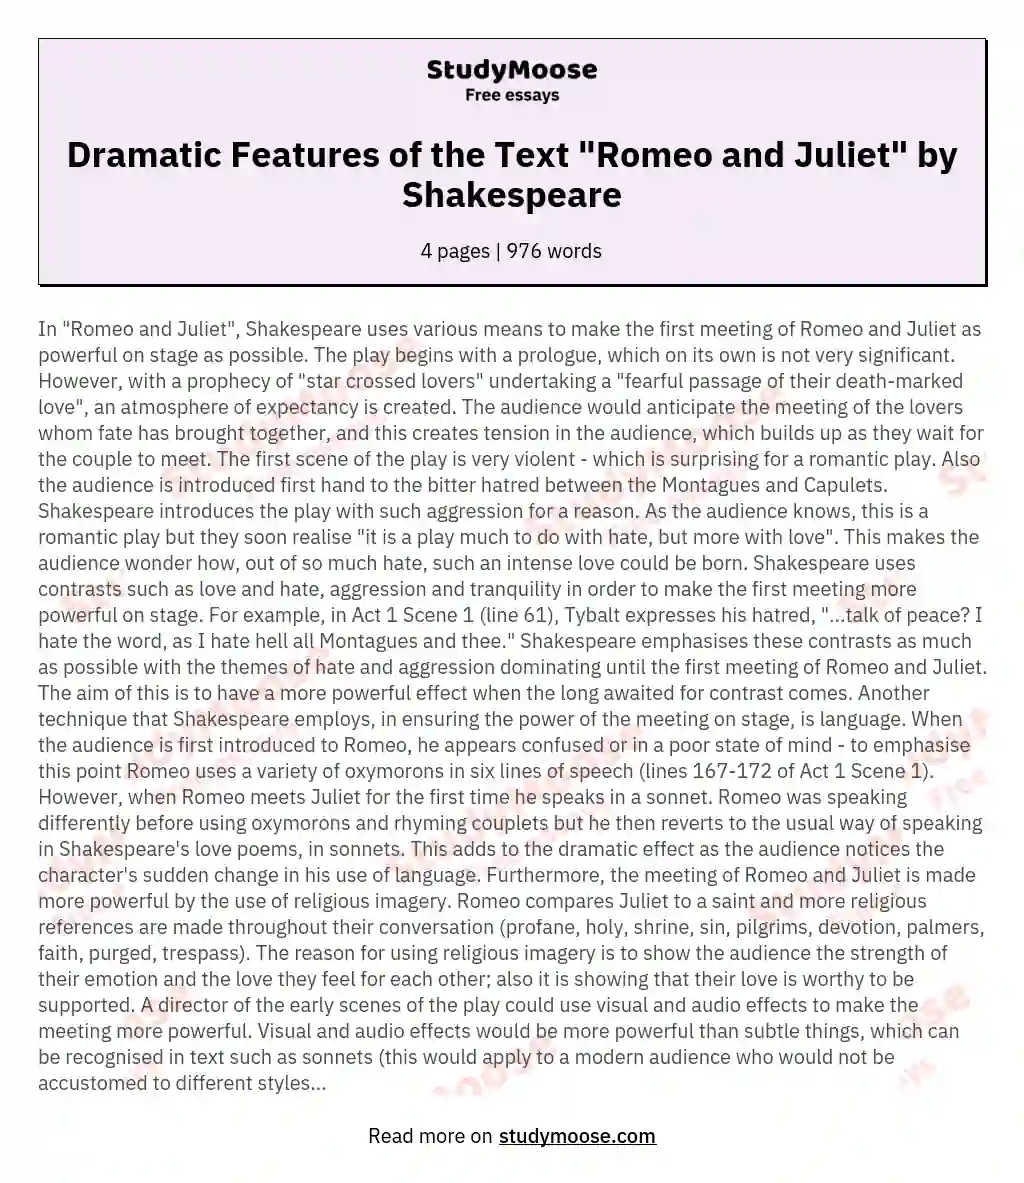 Dramatic Features of the Text "Romeo and Juliet" by Shakespeare essay